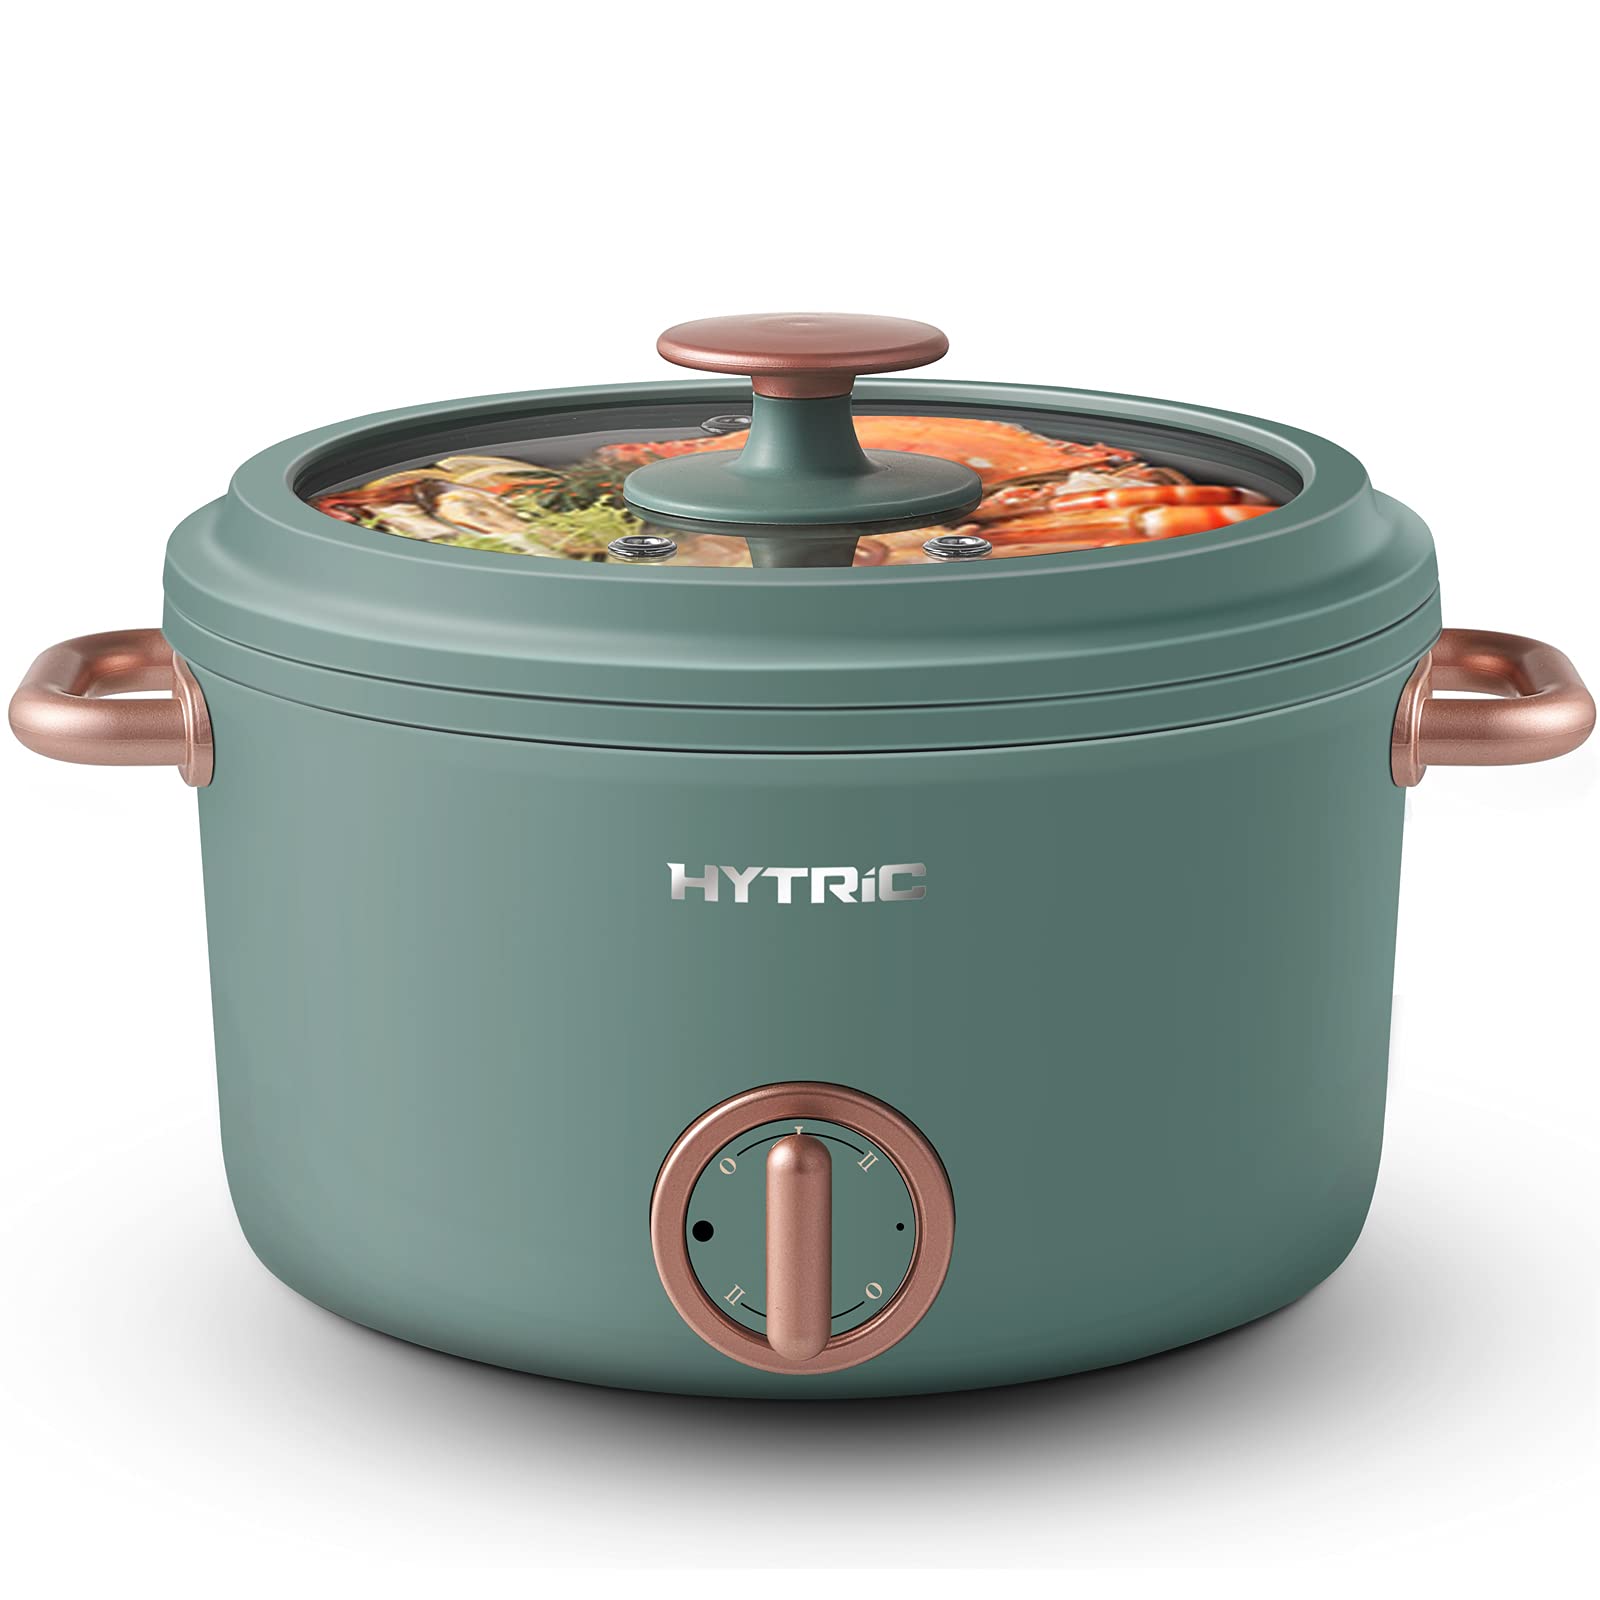 TOPWIT 00 Topwit Electric Hot Pot with Adjustable Power Control